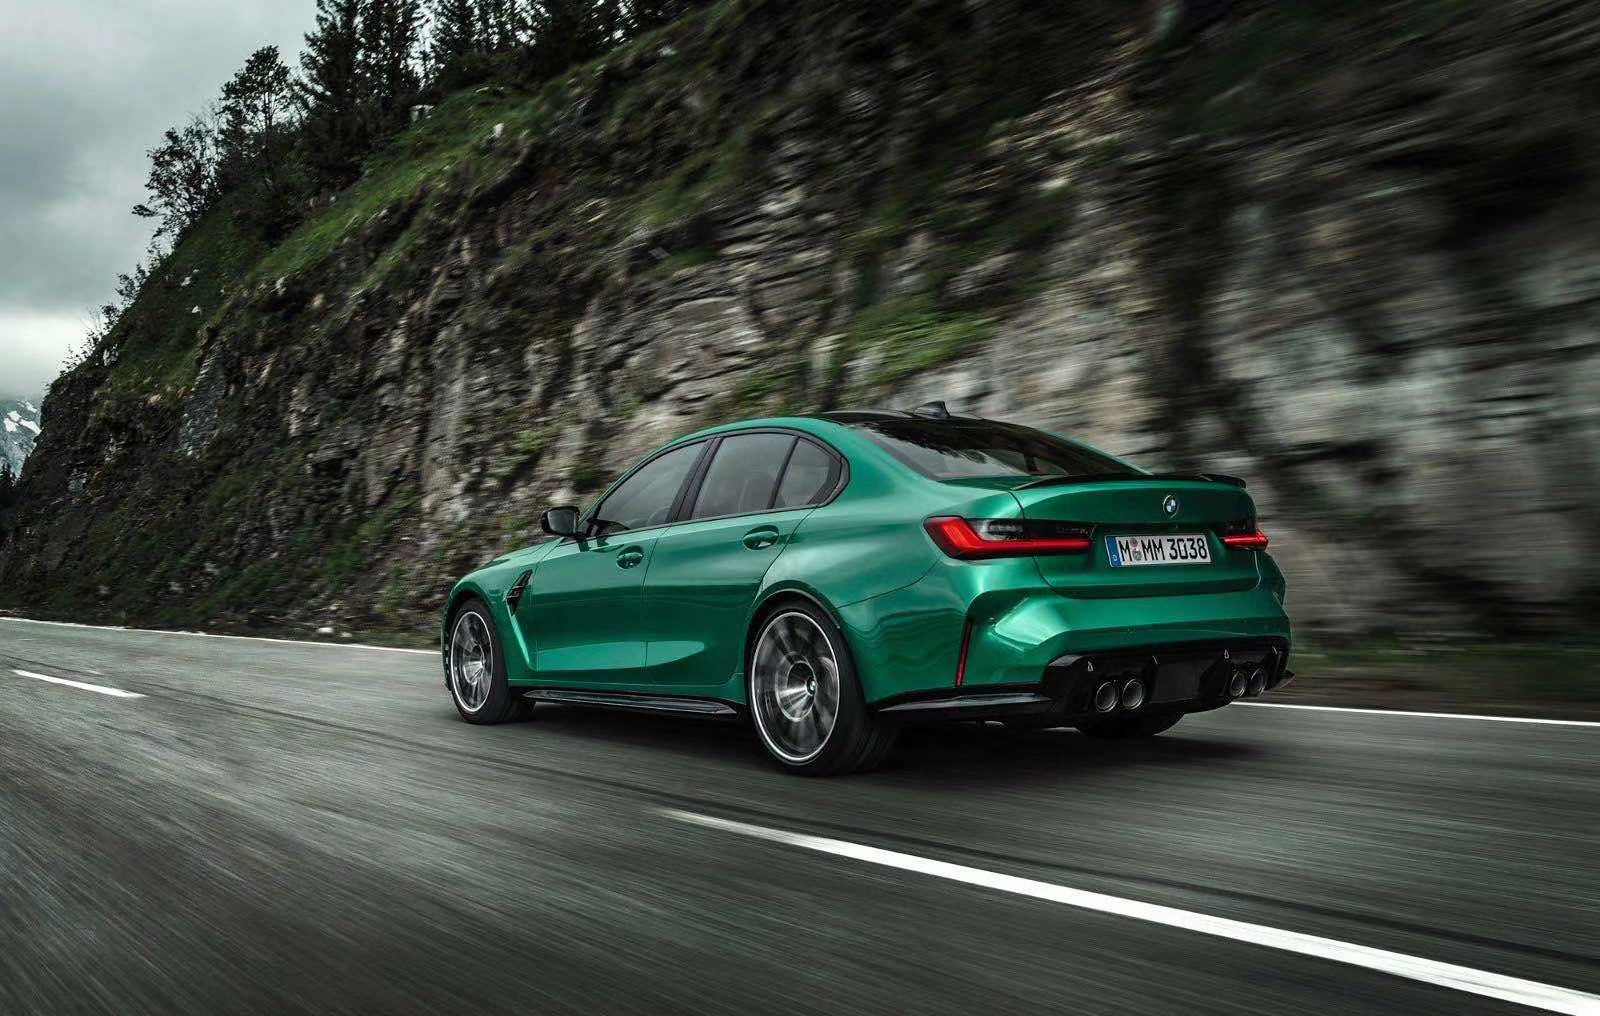 The New 2021 BMW M3 And M4 Have Leaked And Maybe If You’re Pregnant Don’t Look Right At Them